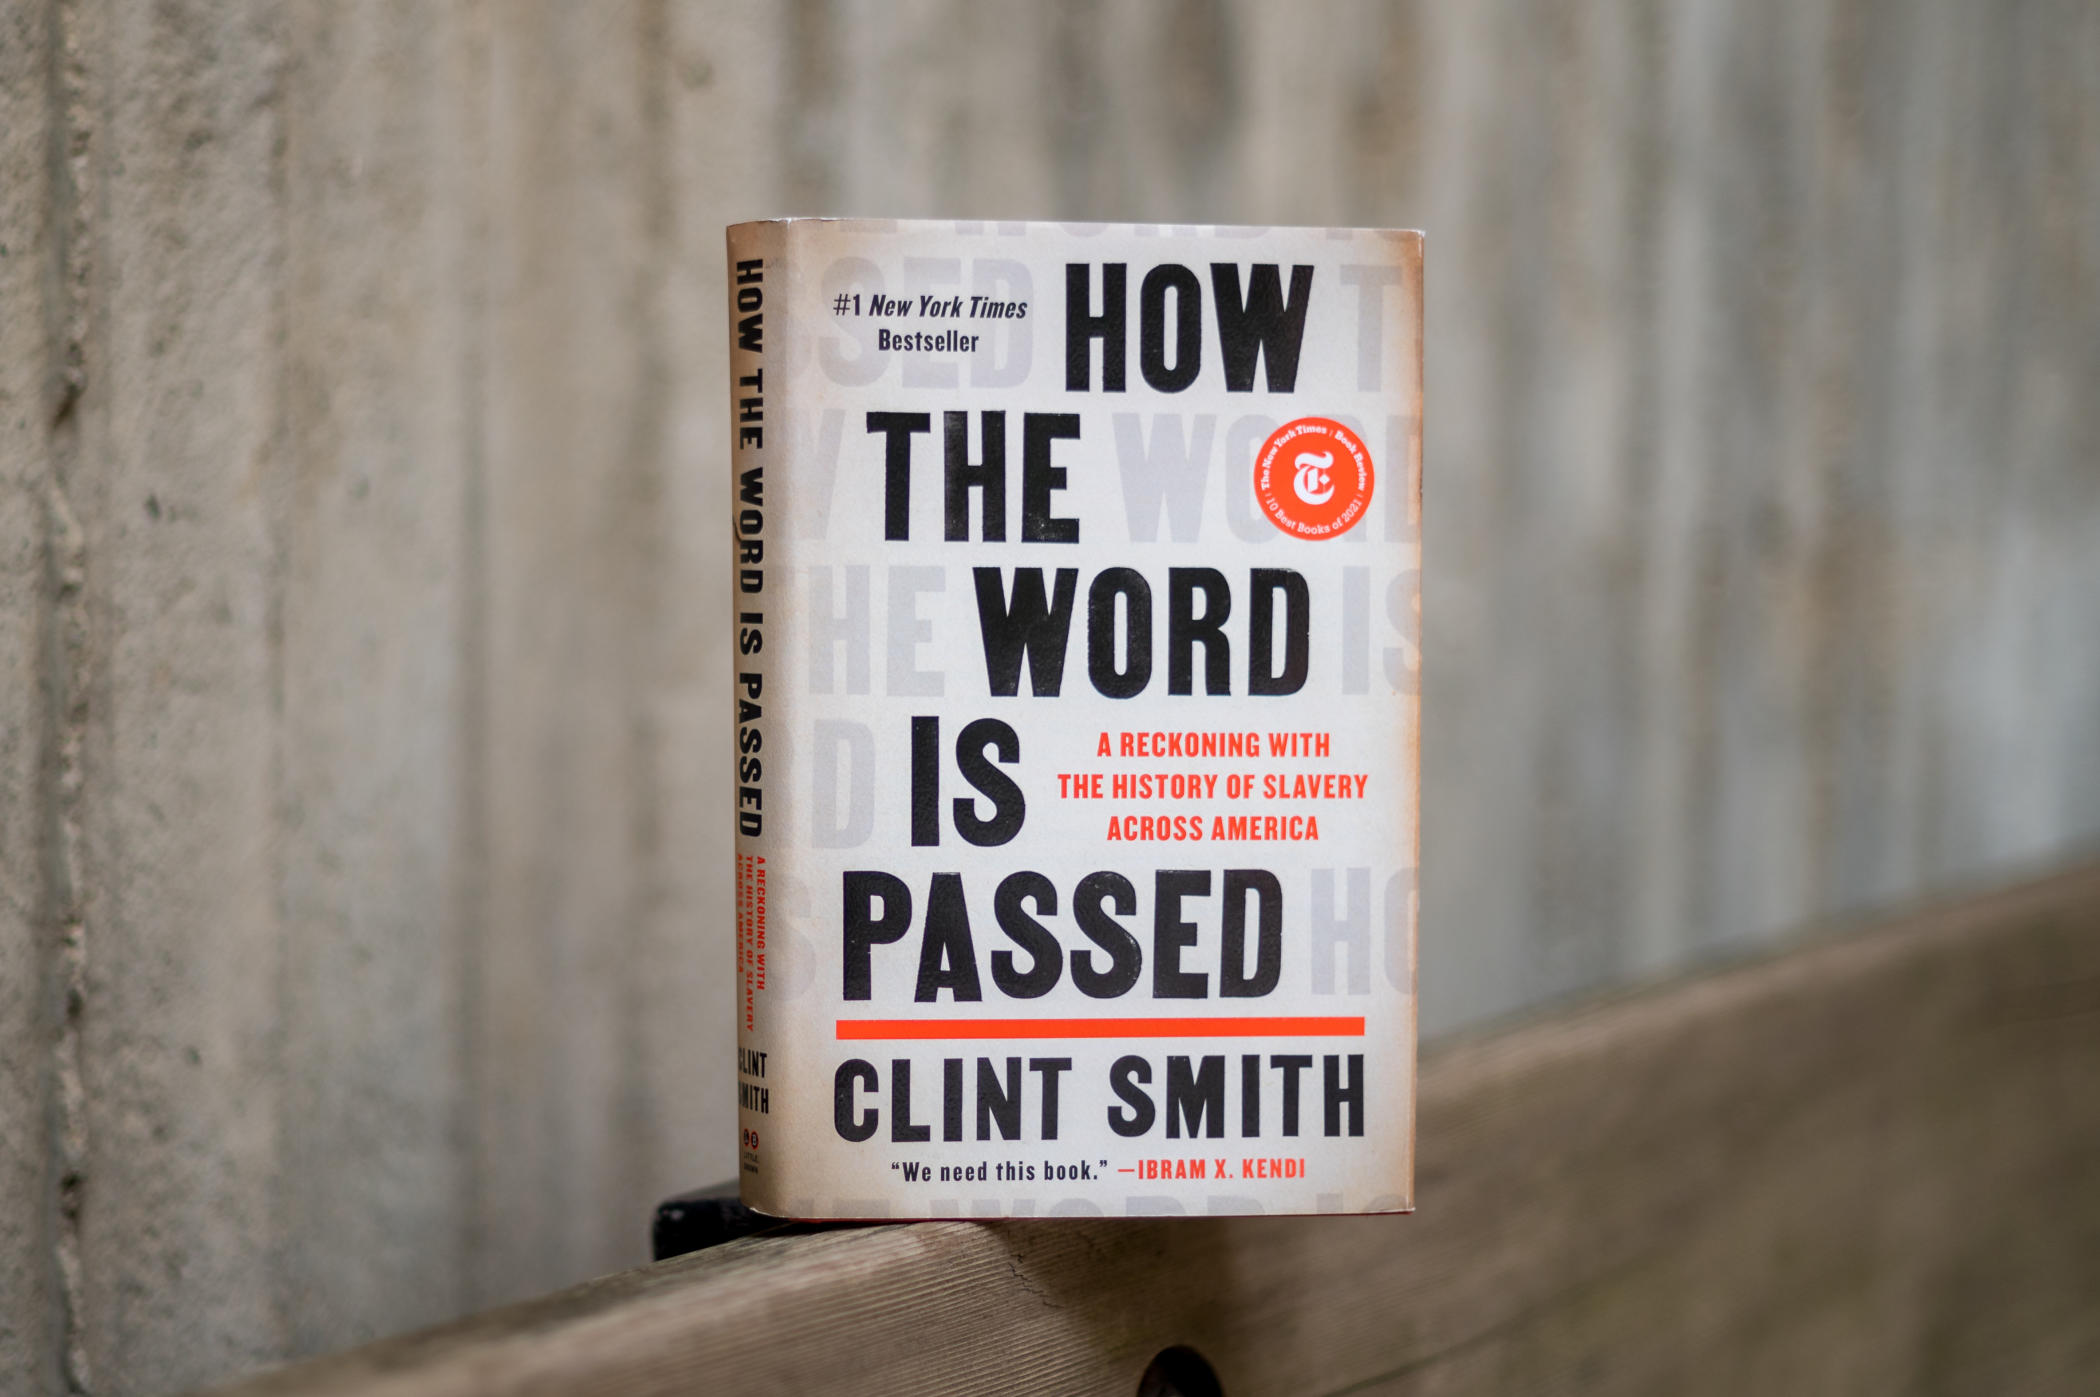 A book, titled "How the Word is Passed," sits on a ledge